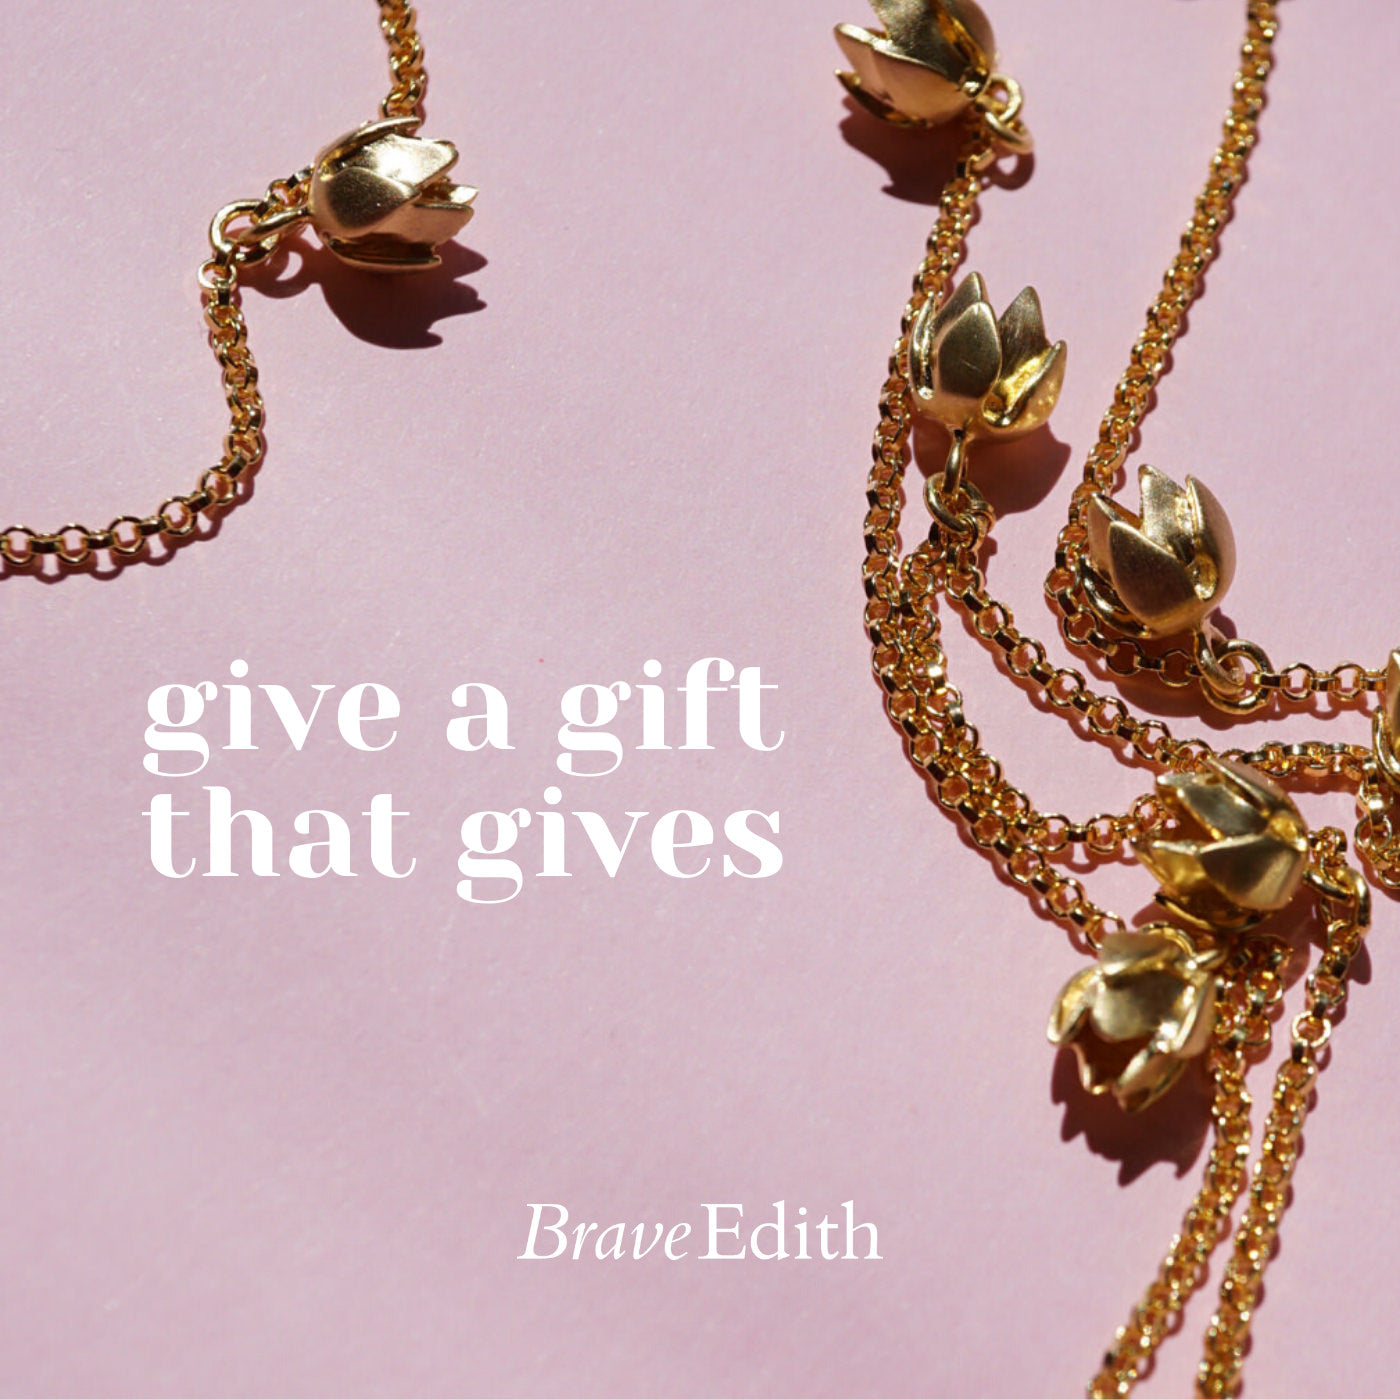 Give a gift that gives gold necklace on pink background